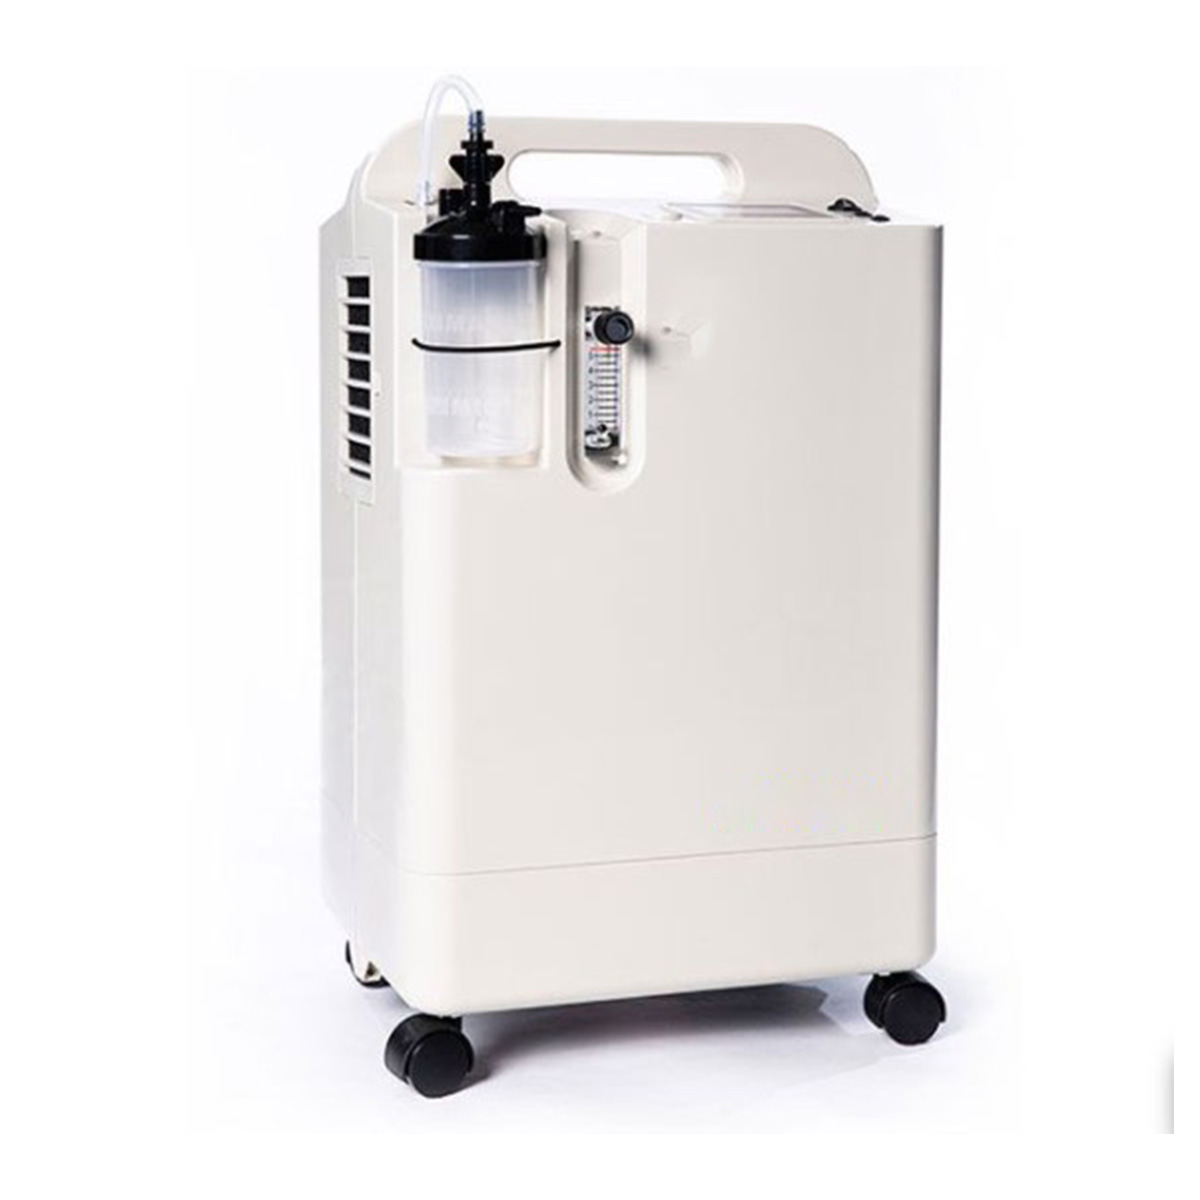 5 Longfian Oxygen Concentrator On Sale Suppliers, Service Provider in Badarpur